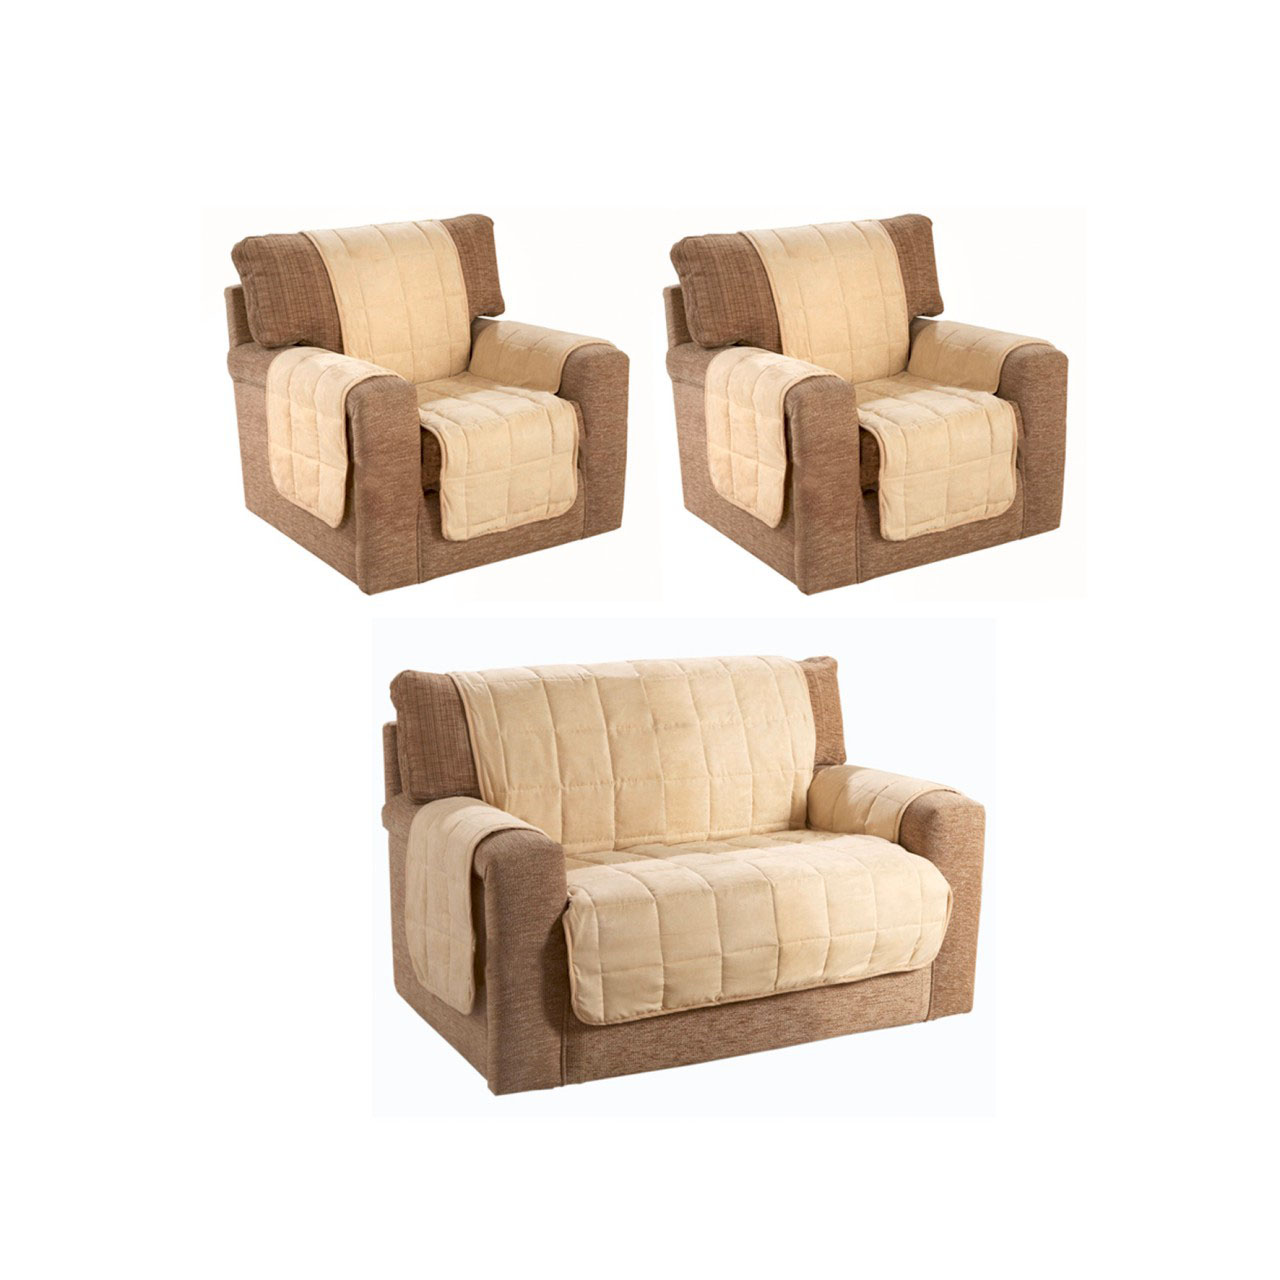 Faux Suede Quilted Furniture Covers - 2-seater Set